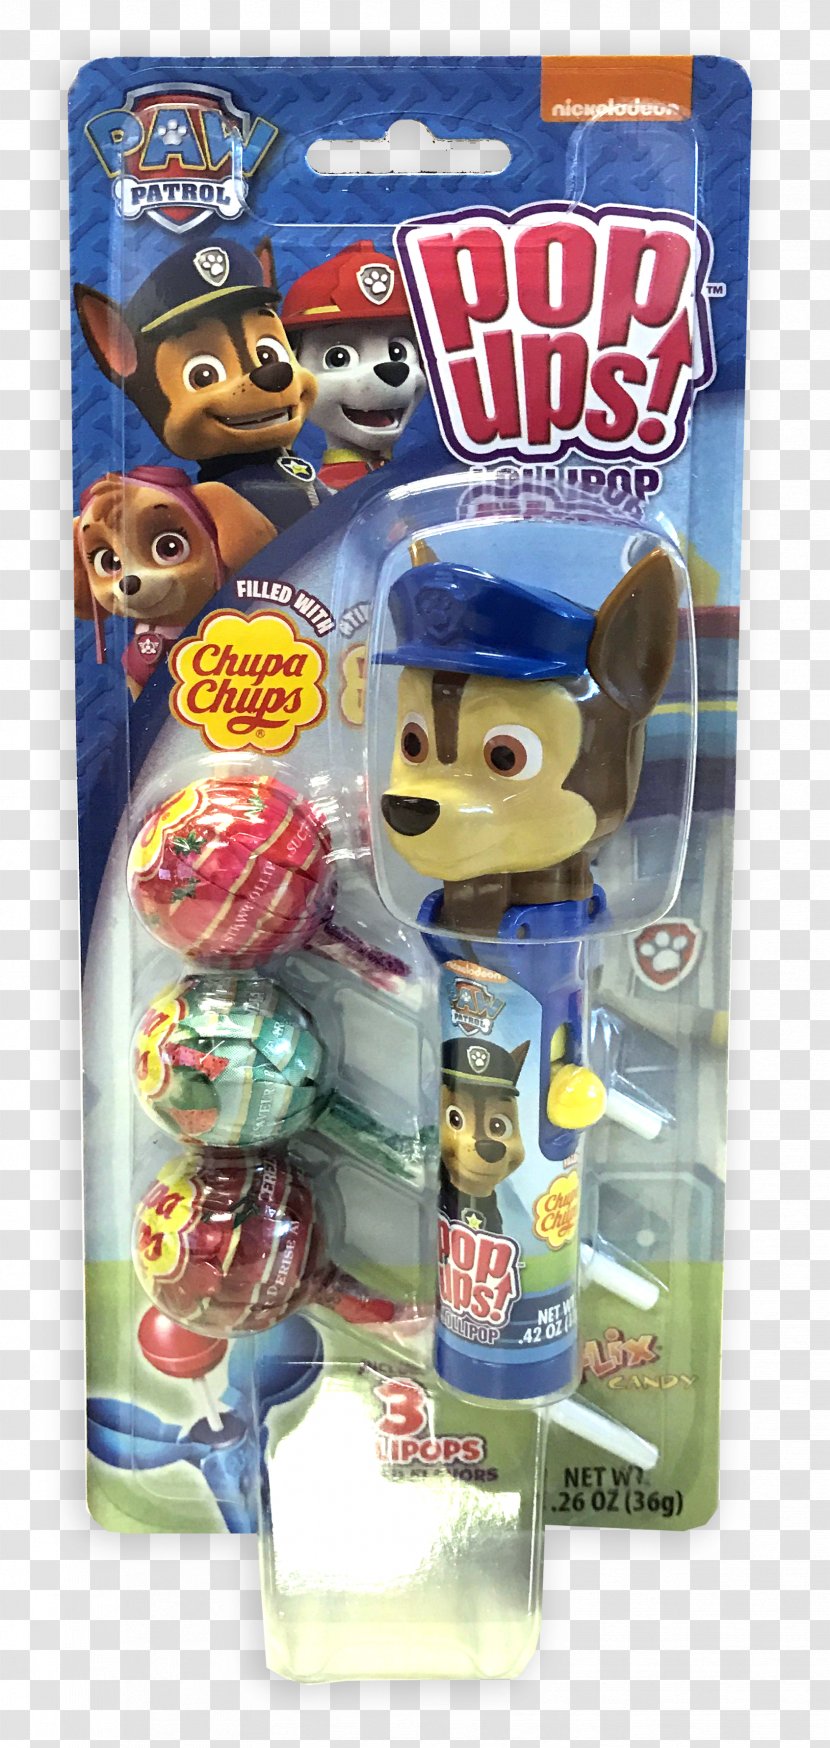 Postage Stamps Action Fiction Rubber Stamp & Toy Figures Tampon - Walt Disney Company - Paw Patrol Chase Transparent PNG